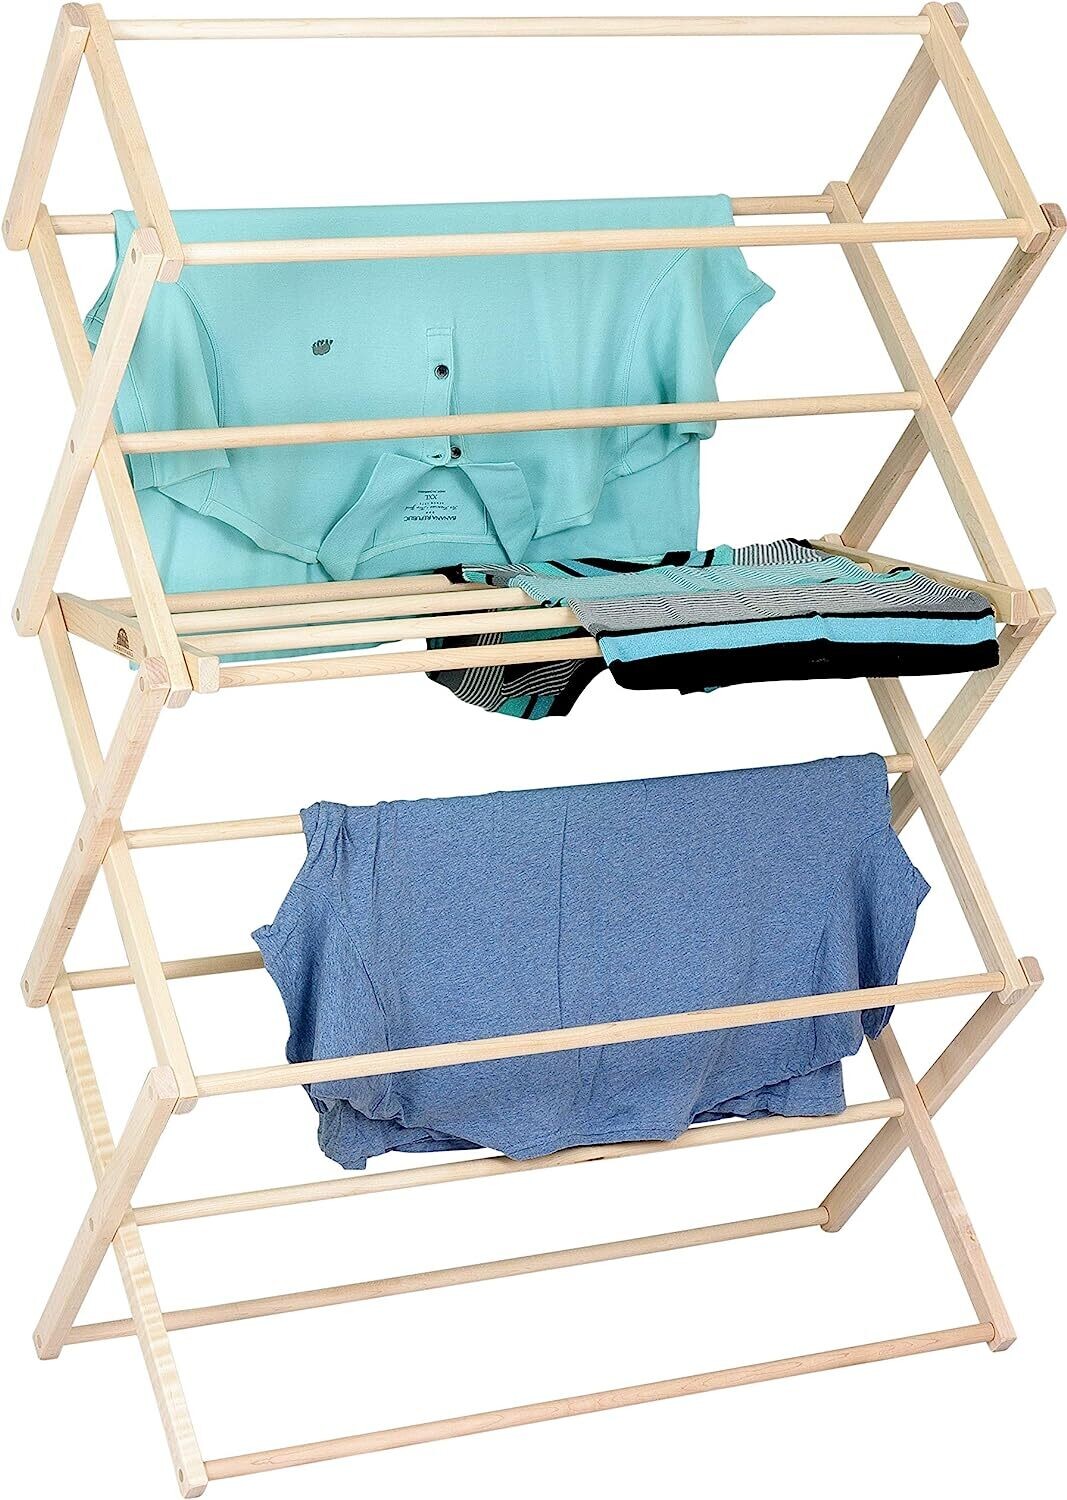 Sarkar Foldable Wooden Clothes Drying Rack Size H-5FT, W-4FT 10 Pipes Portable &amp; collapsible CDS-BIG